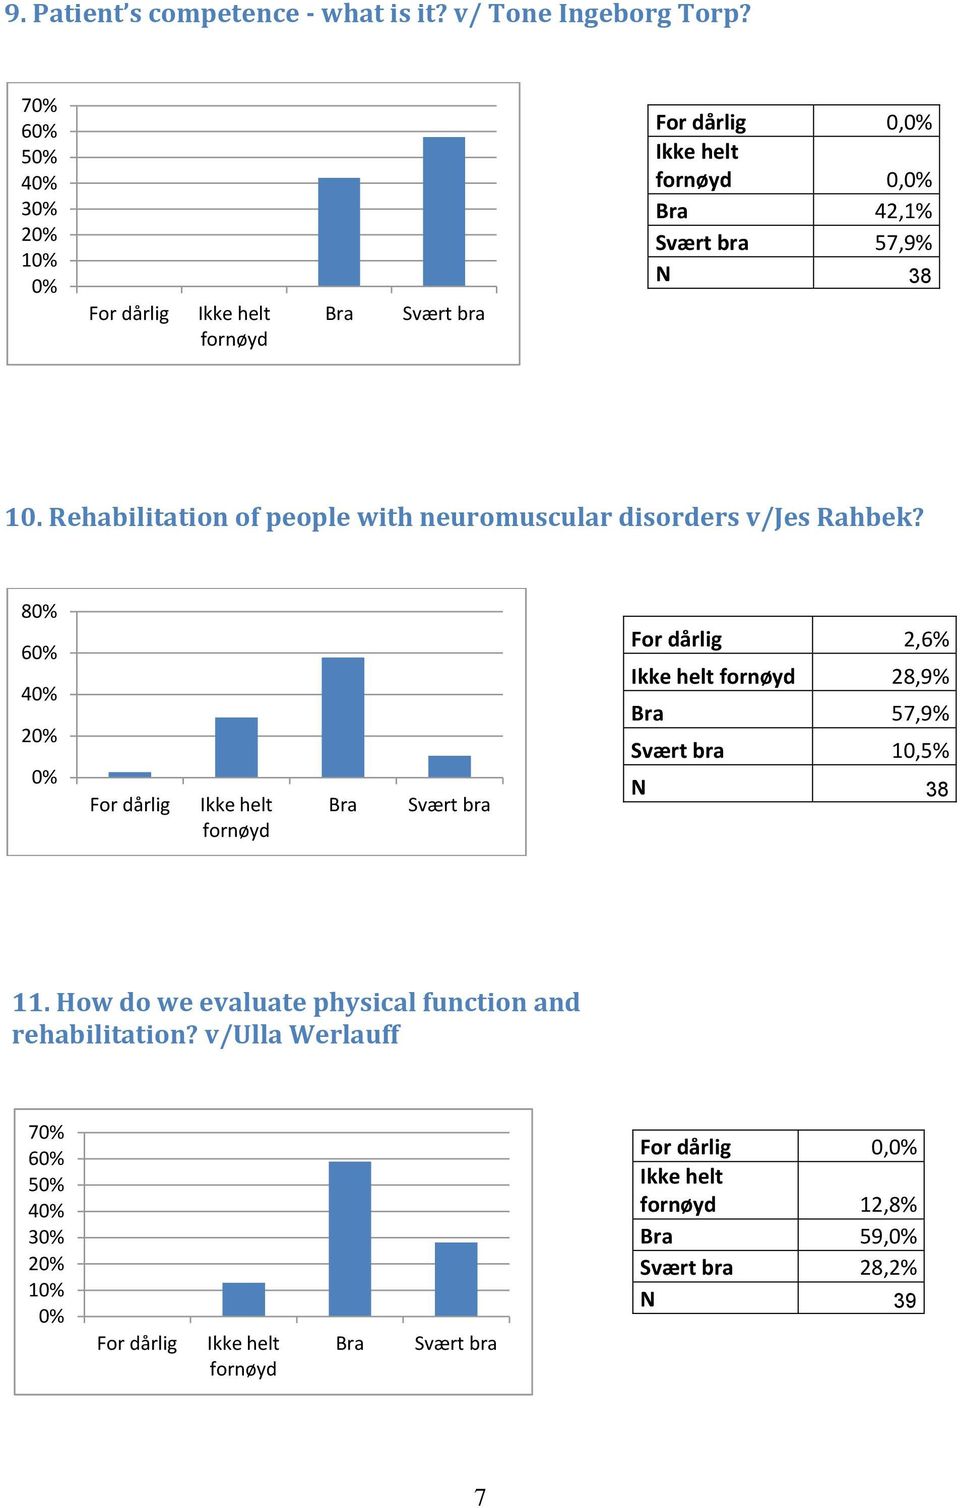 Rehabilitation of people with neuromuscular disorders v/jes Rahbek?